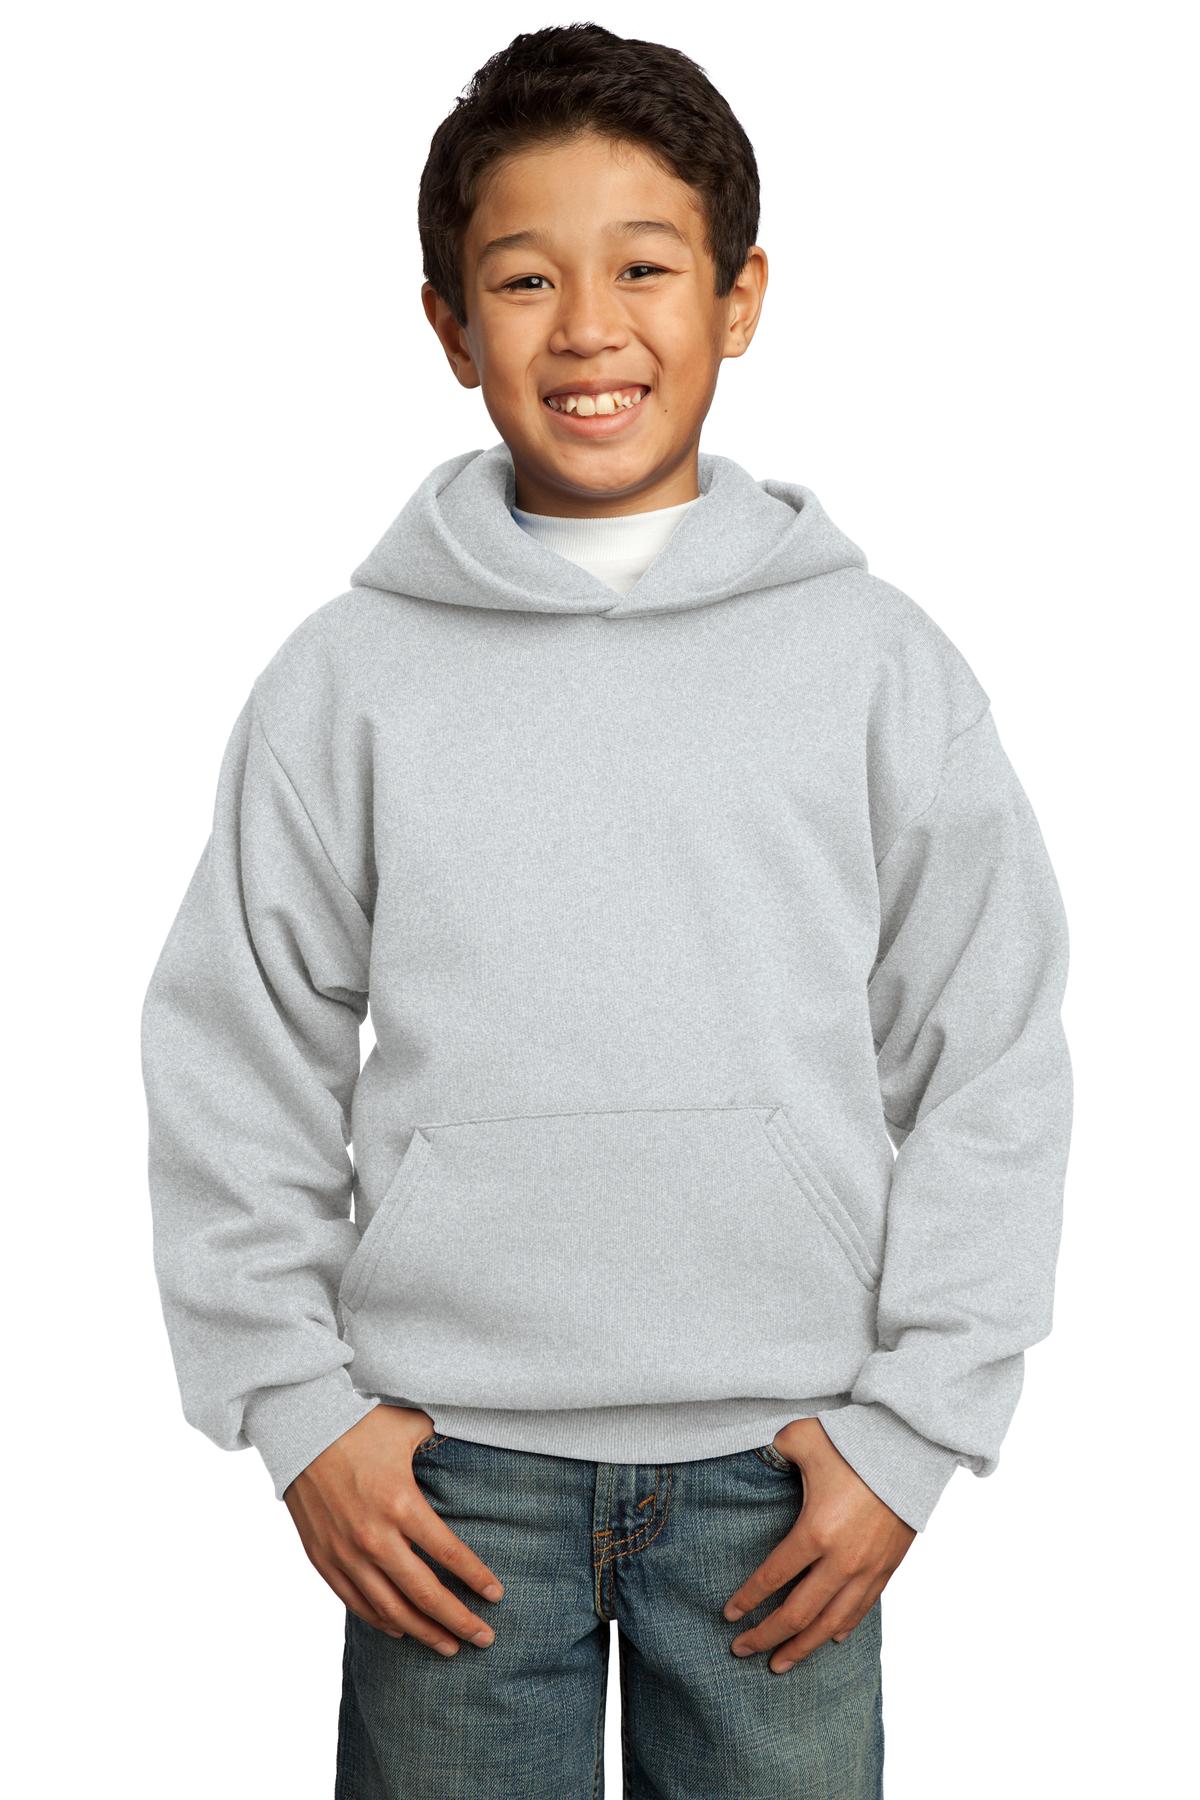 Port & Company - Youth Core Fleece Pullover Hooded...